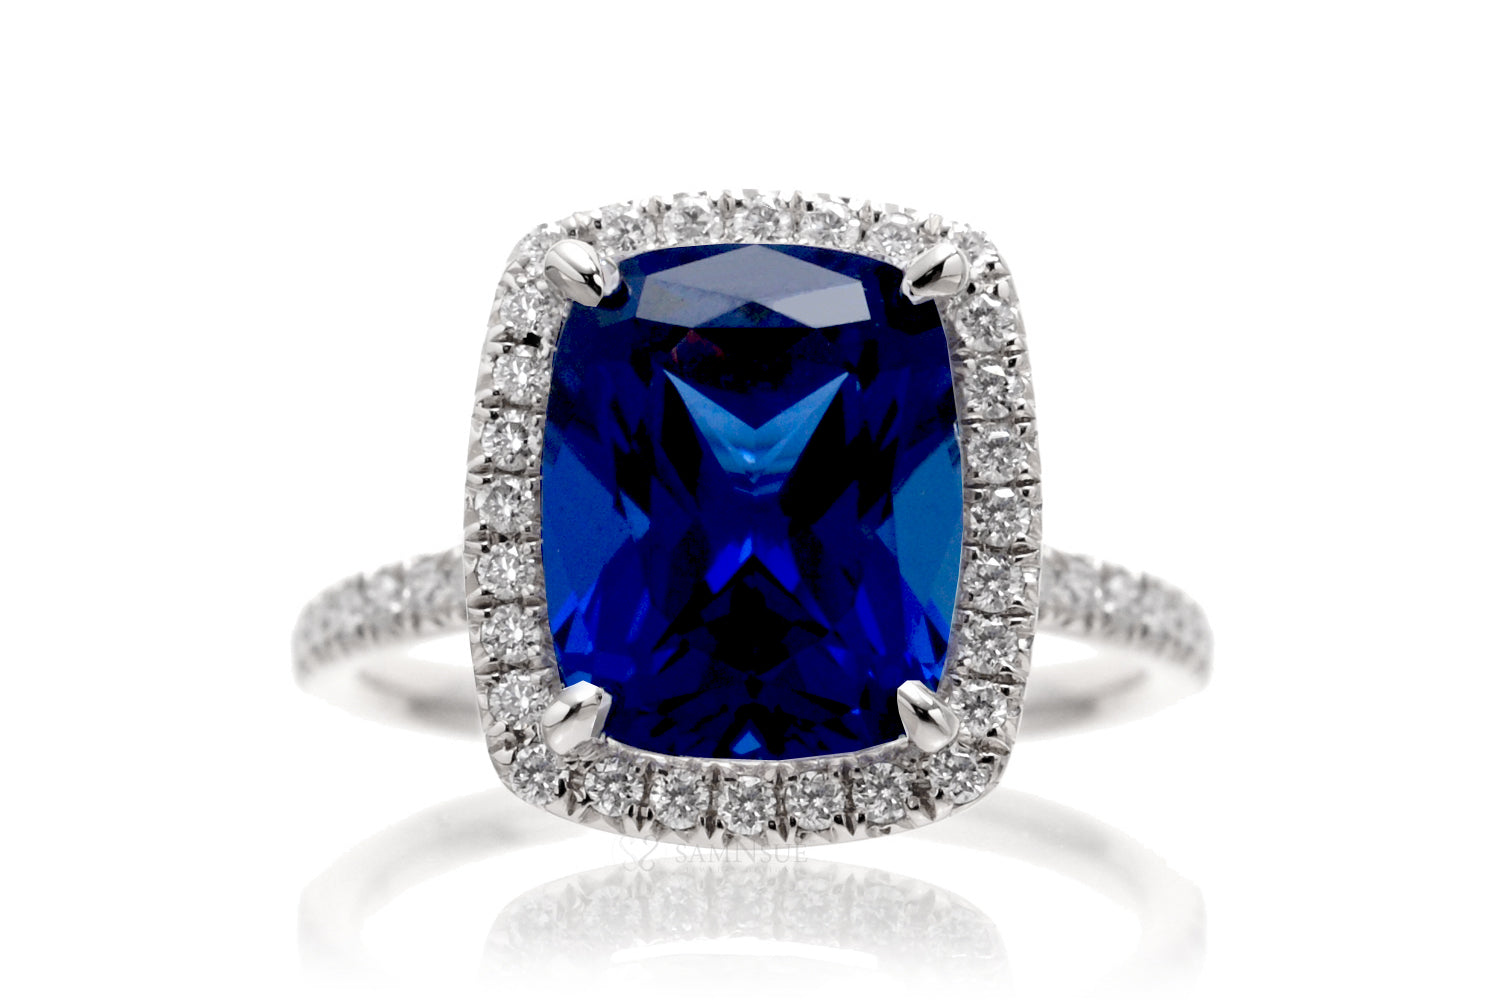 Cushion Chatham Sapphire Engagement Ring With A Diamond Halo | The Caitlin Ring In White Gold